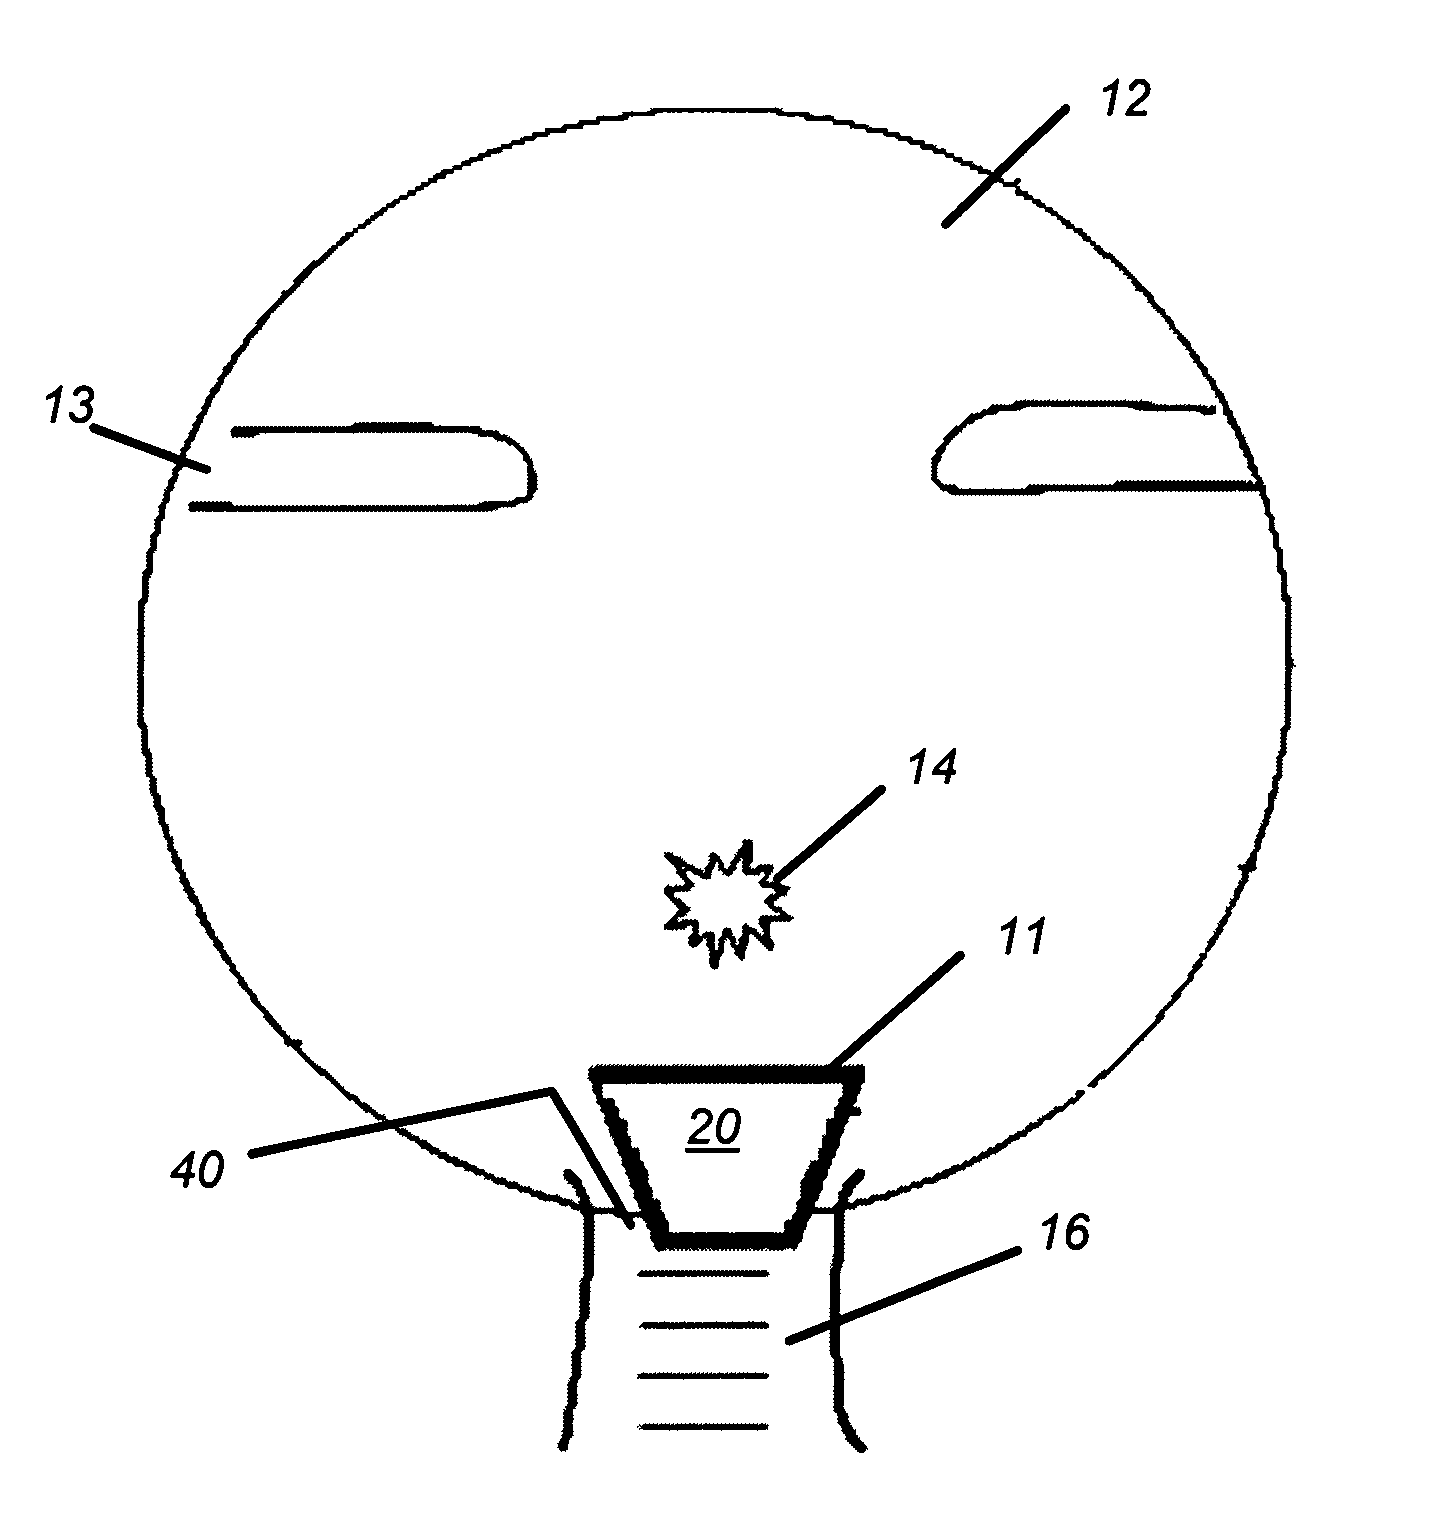 Optic nerve head implant and medication delivery system